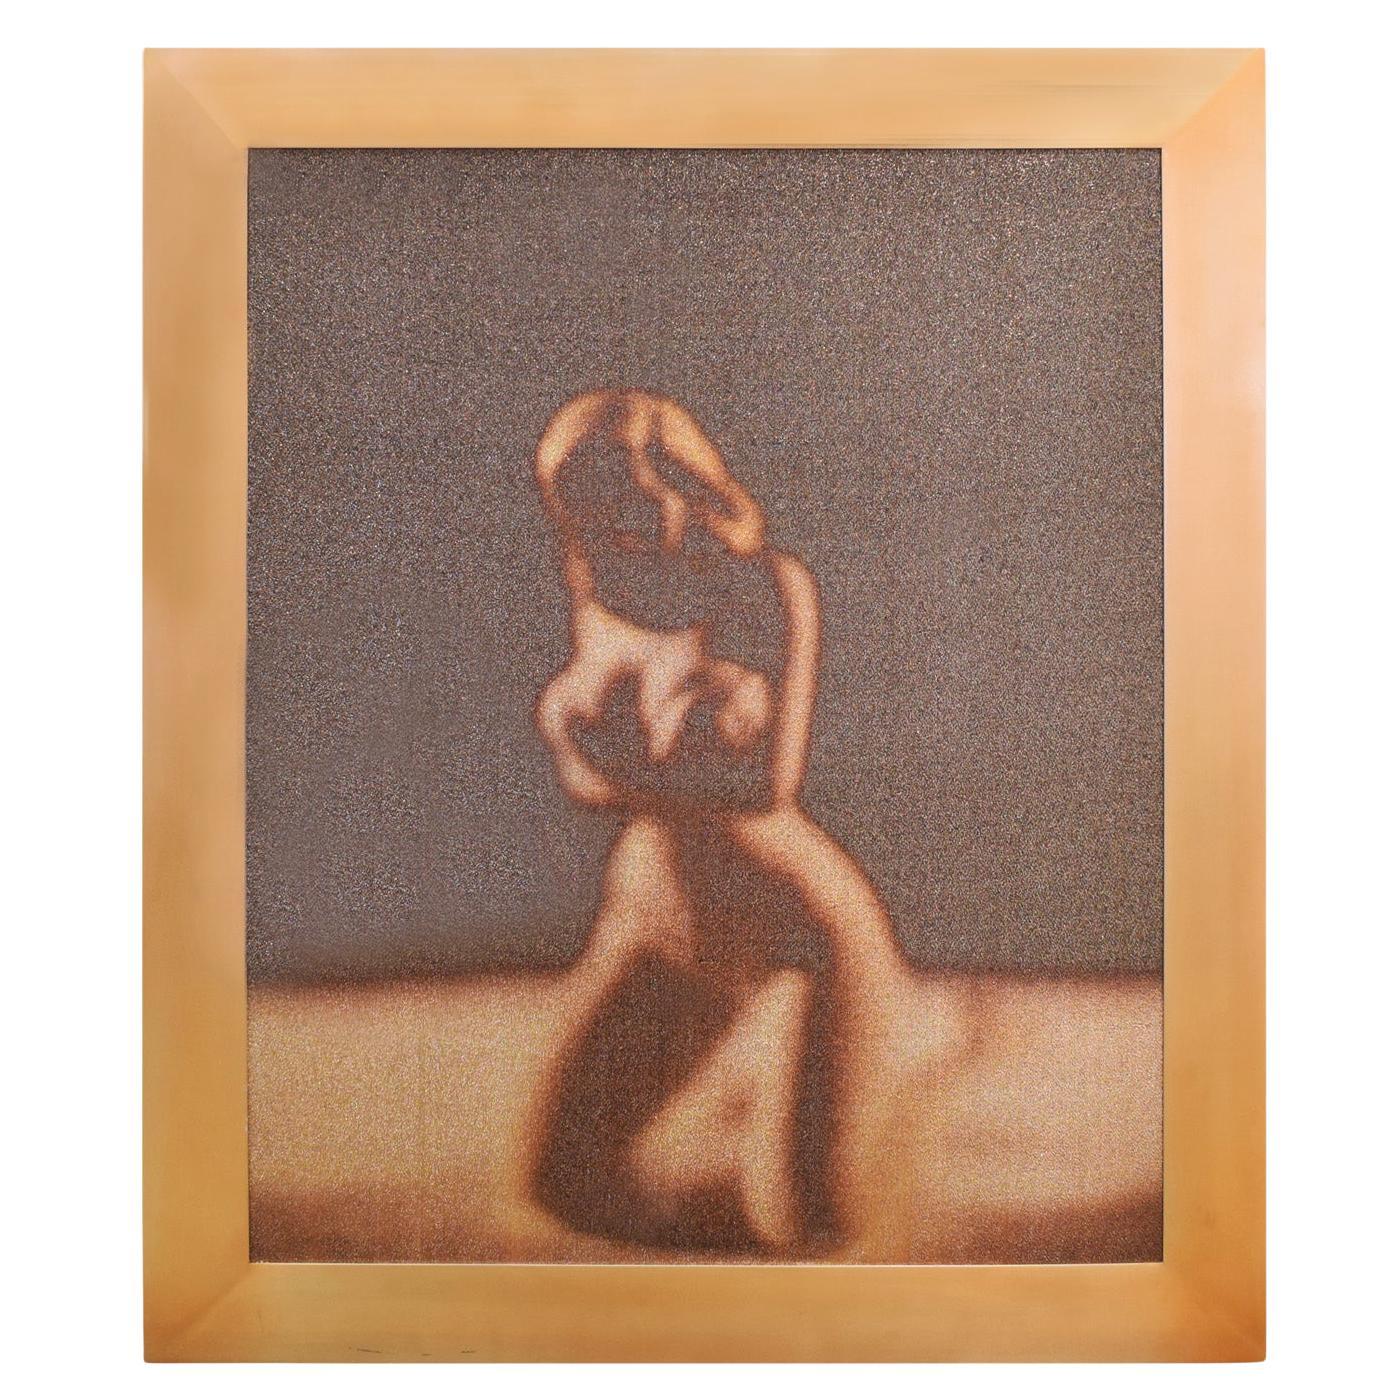 David Levinthal One-of-a-Kind Large Photograph "Desire", 1991